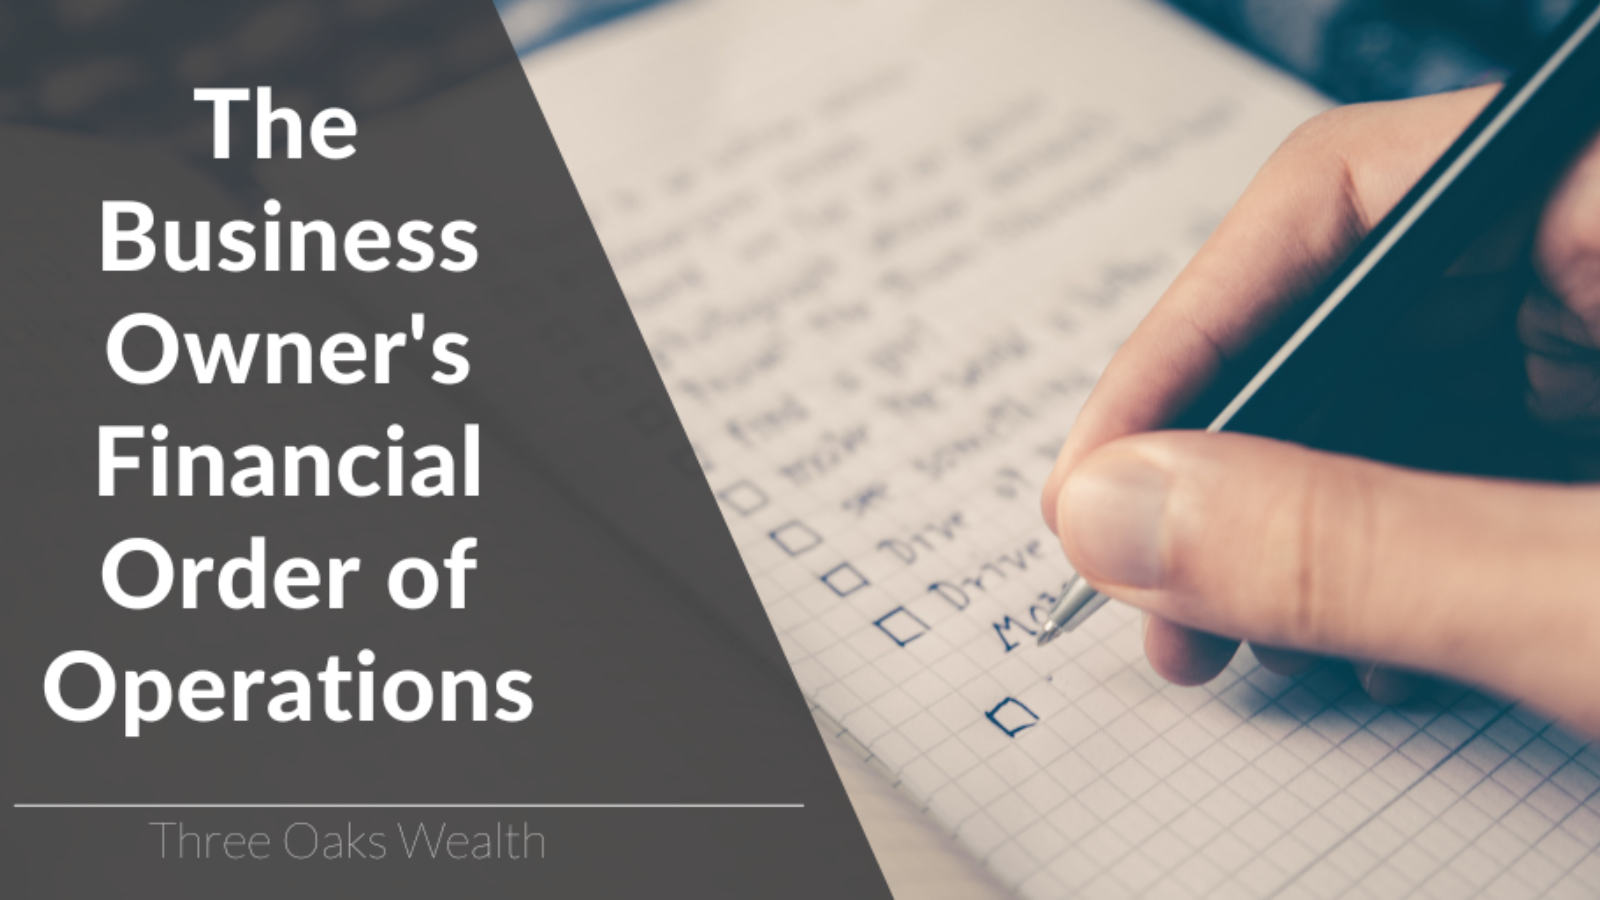 The Business Owner’s Financial Order of Operations main image